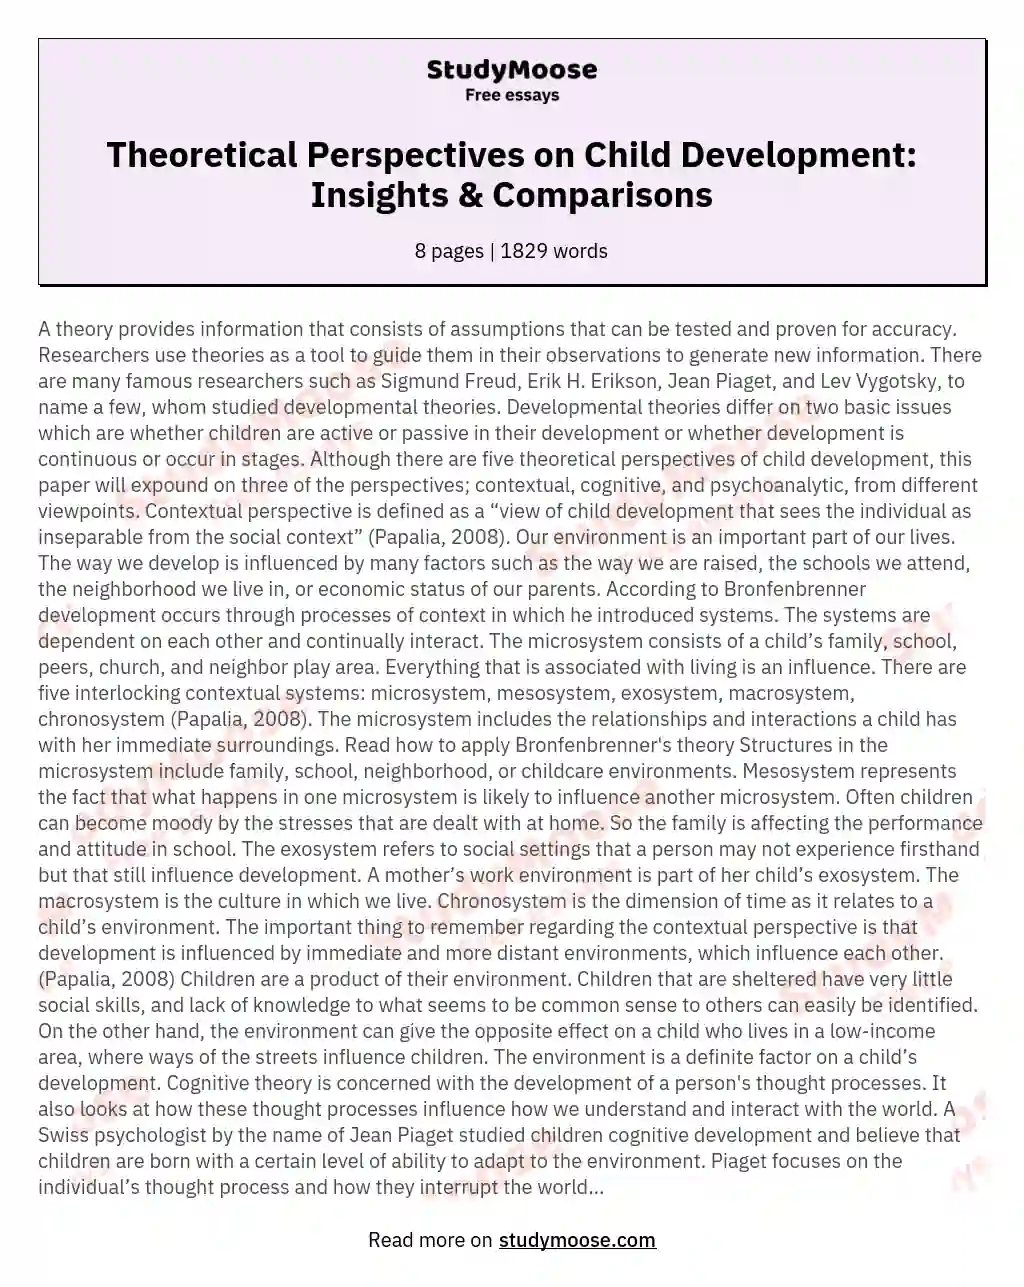 Theoretical Perspectives on Child Development: Insights & Comparisons essay